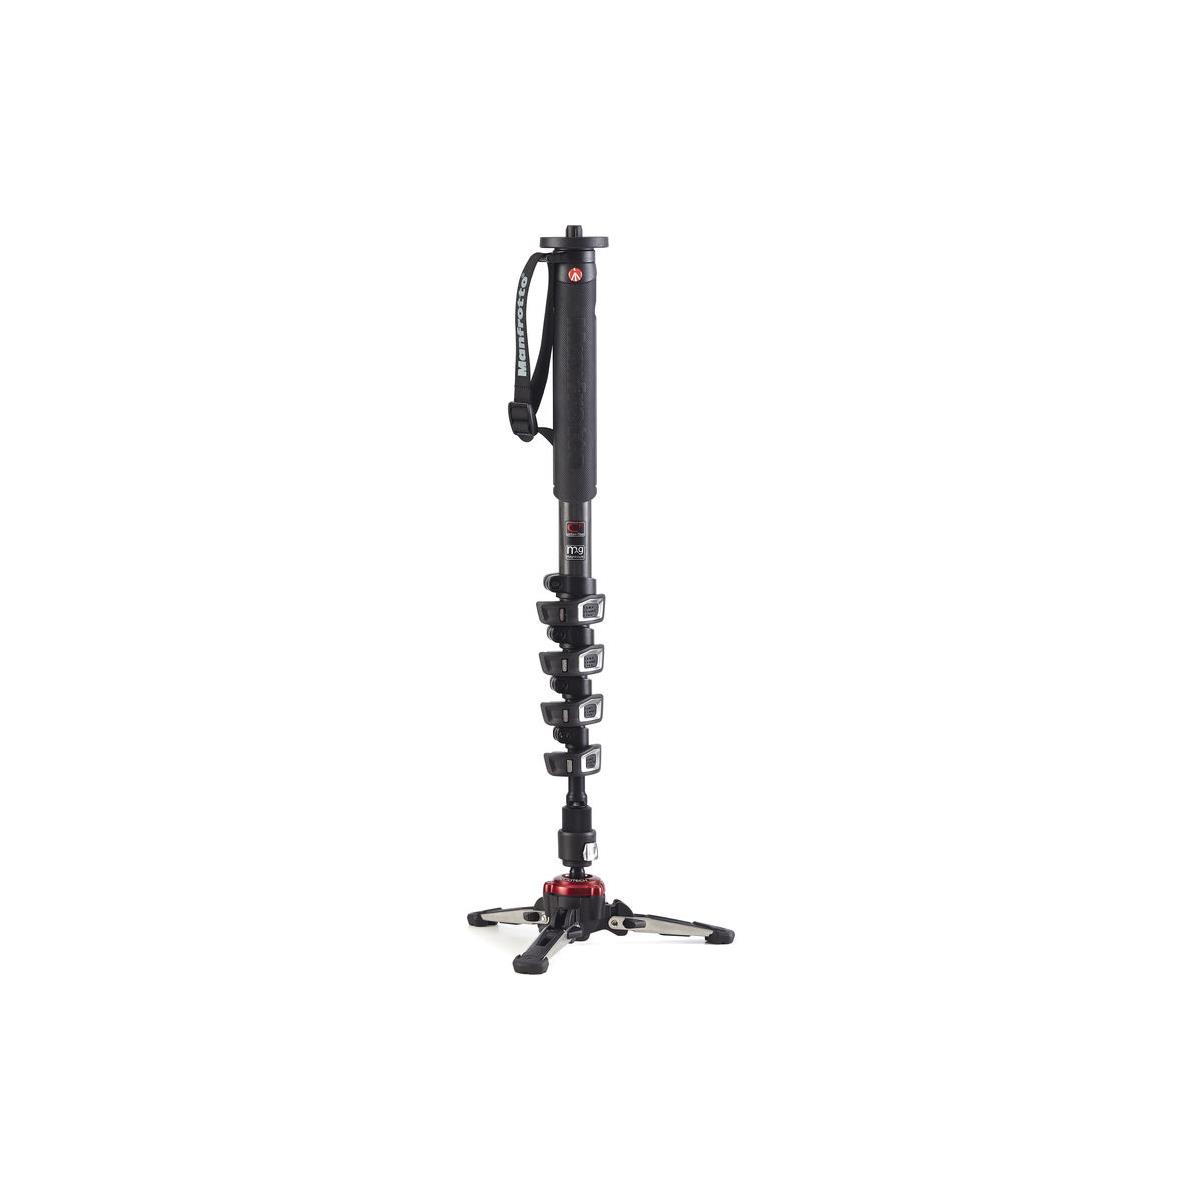 Image of Manfrotto XPRO Monopod+ 5-Section Carbon Fiber Video Monopod